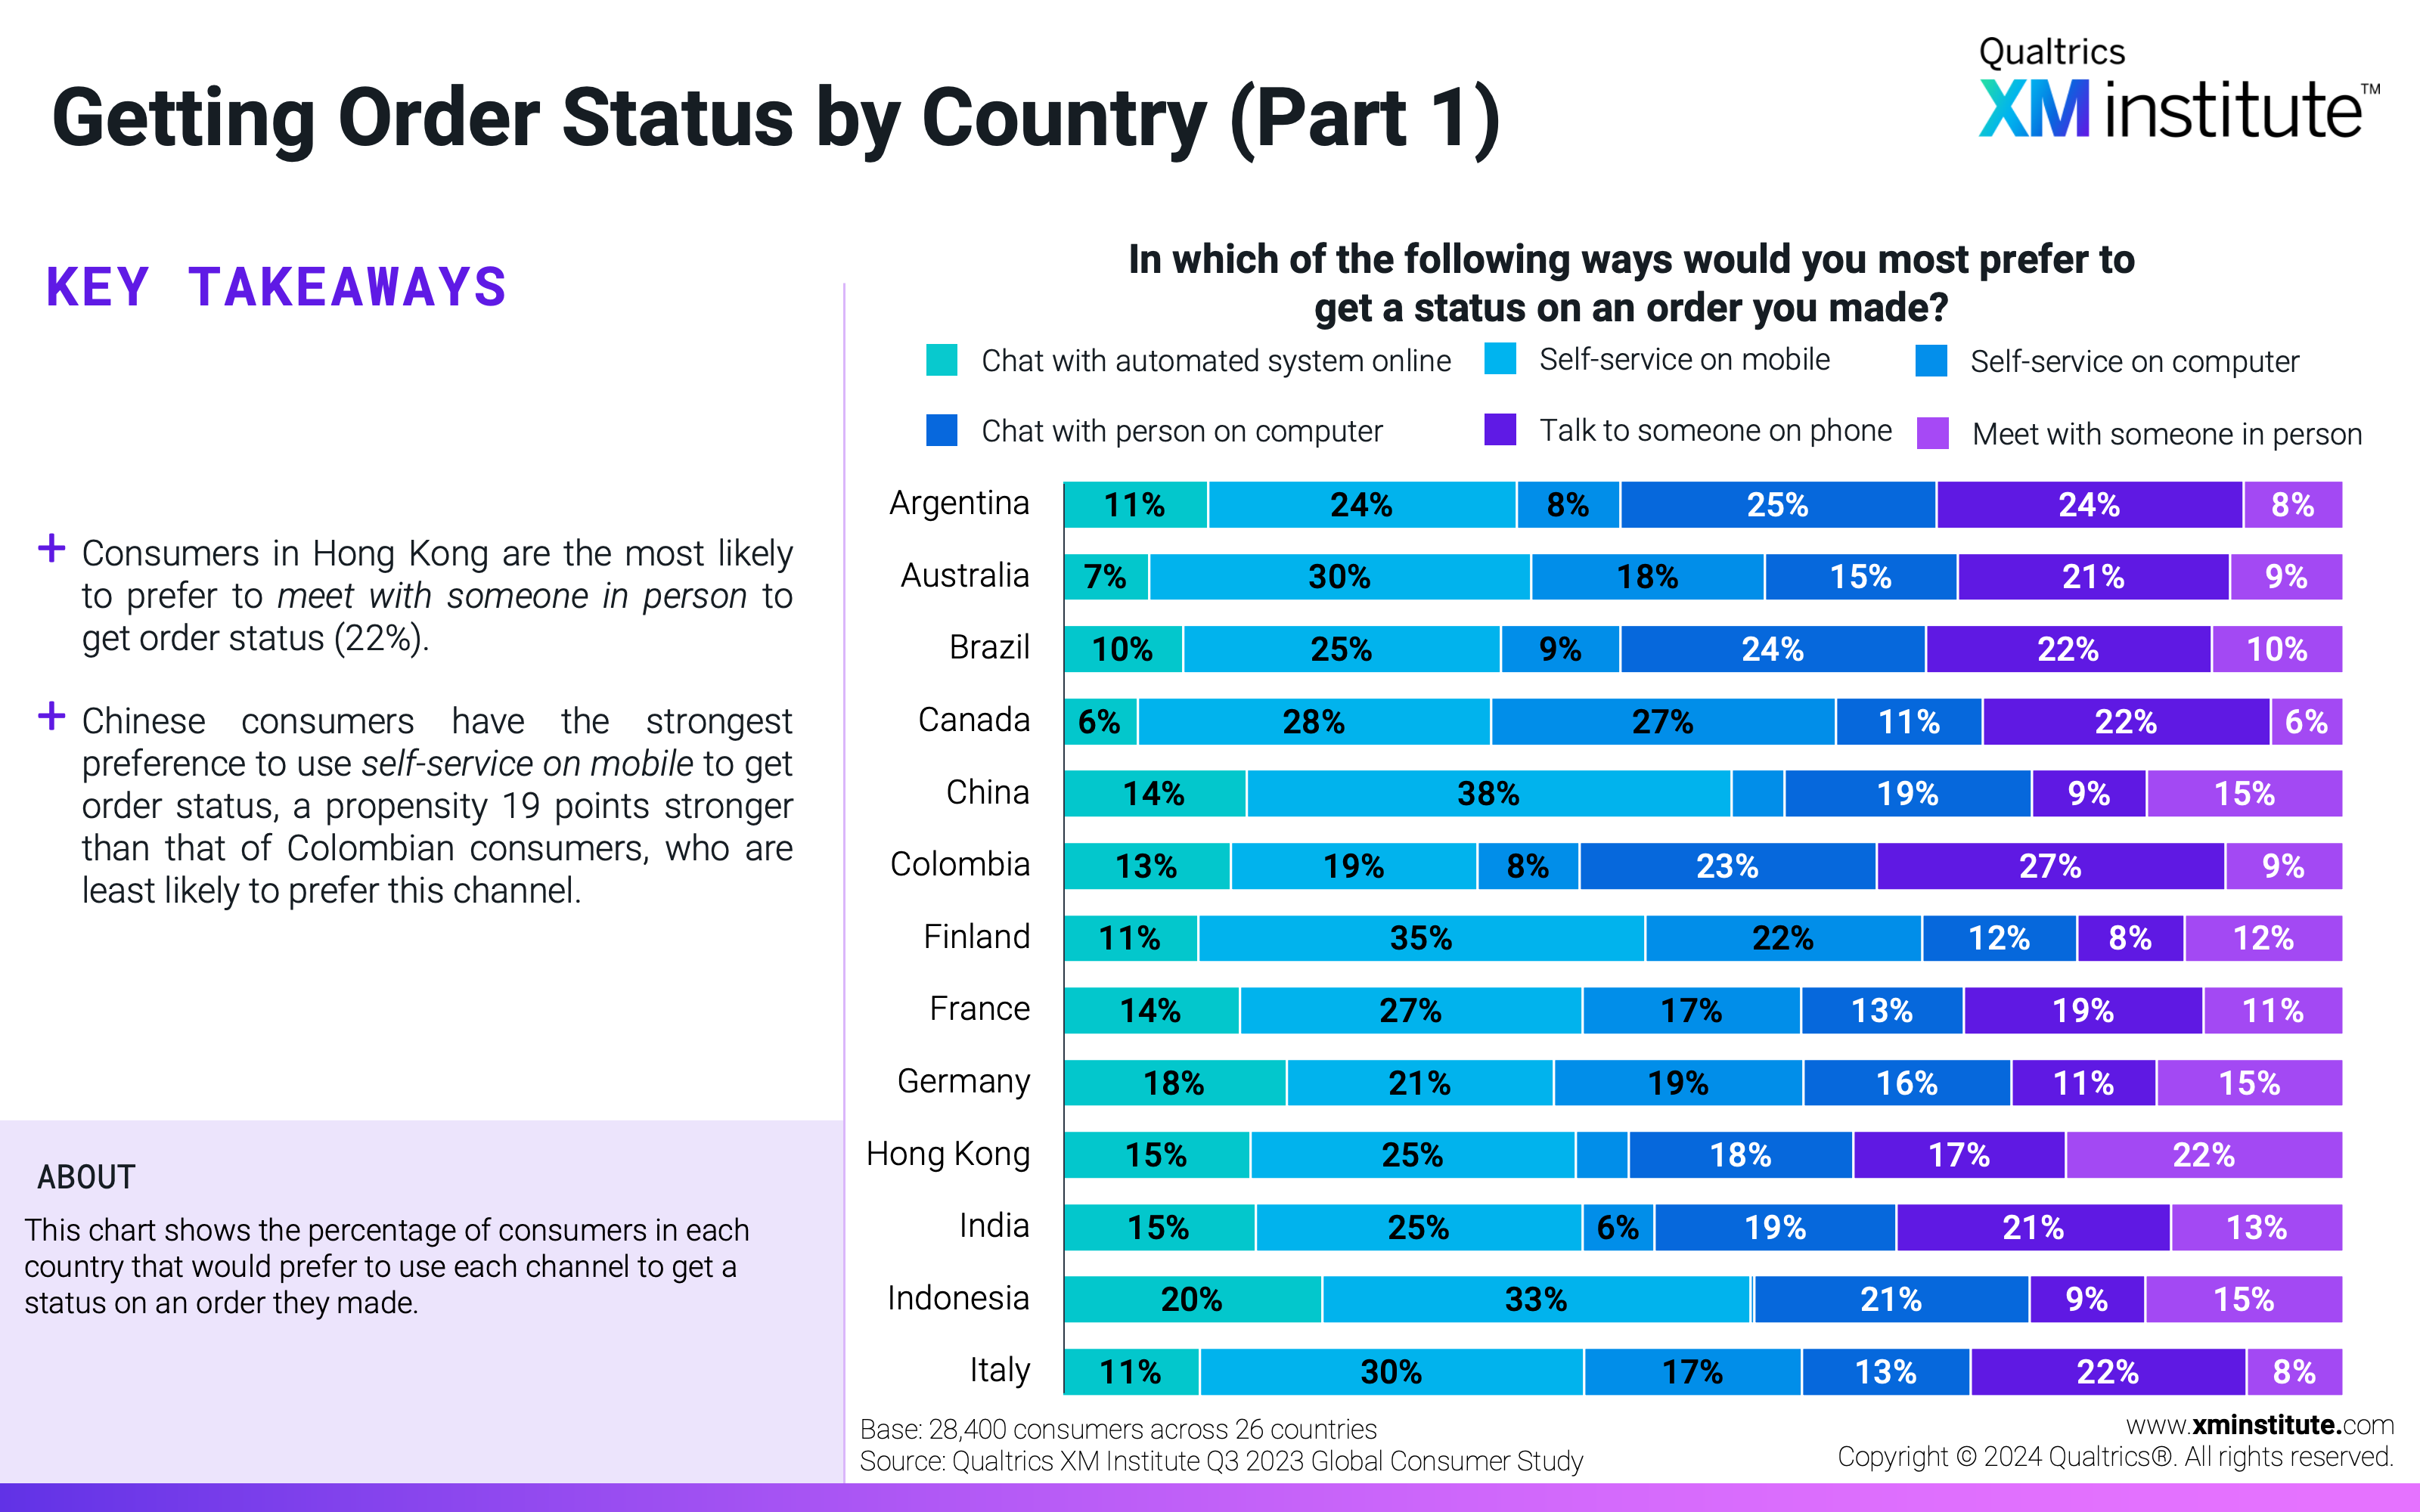 This chart shows the percentage of consumers in each country that would prefer to use each channel to get a status on an order they made. 